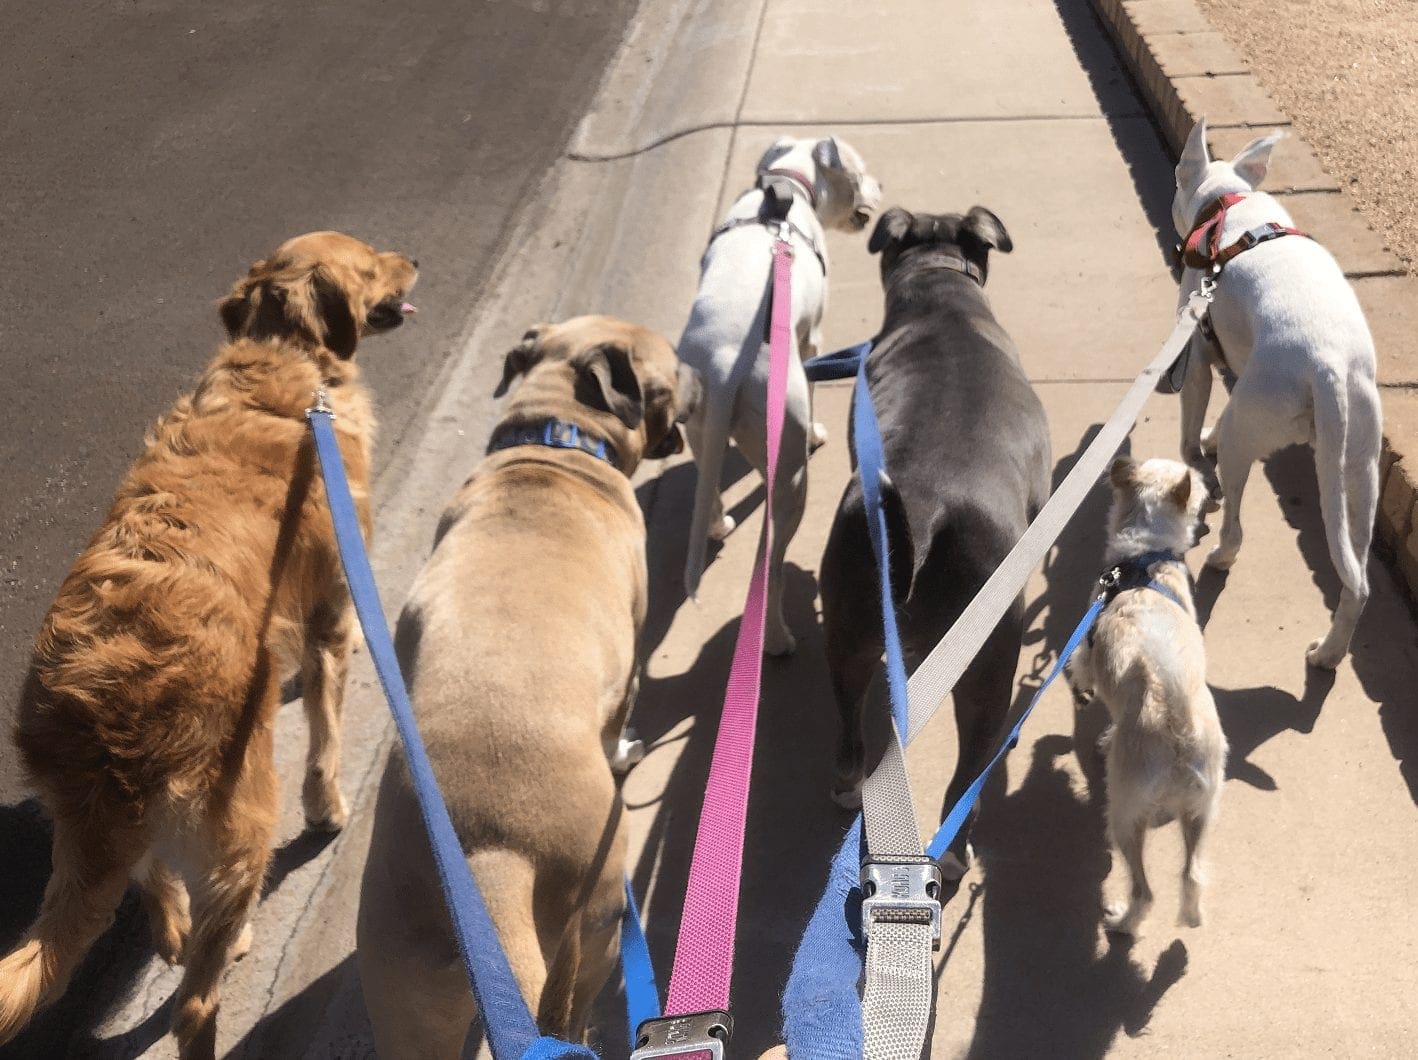 Six dogs walking together, yes its possible, Kristie the positive reinforcement dog trainer at FurBabies & Friends in Glendale AZ can help.